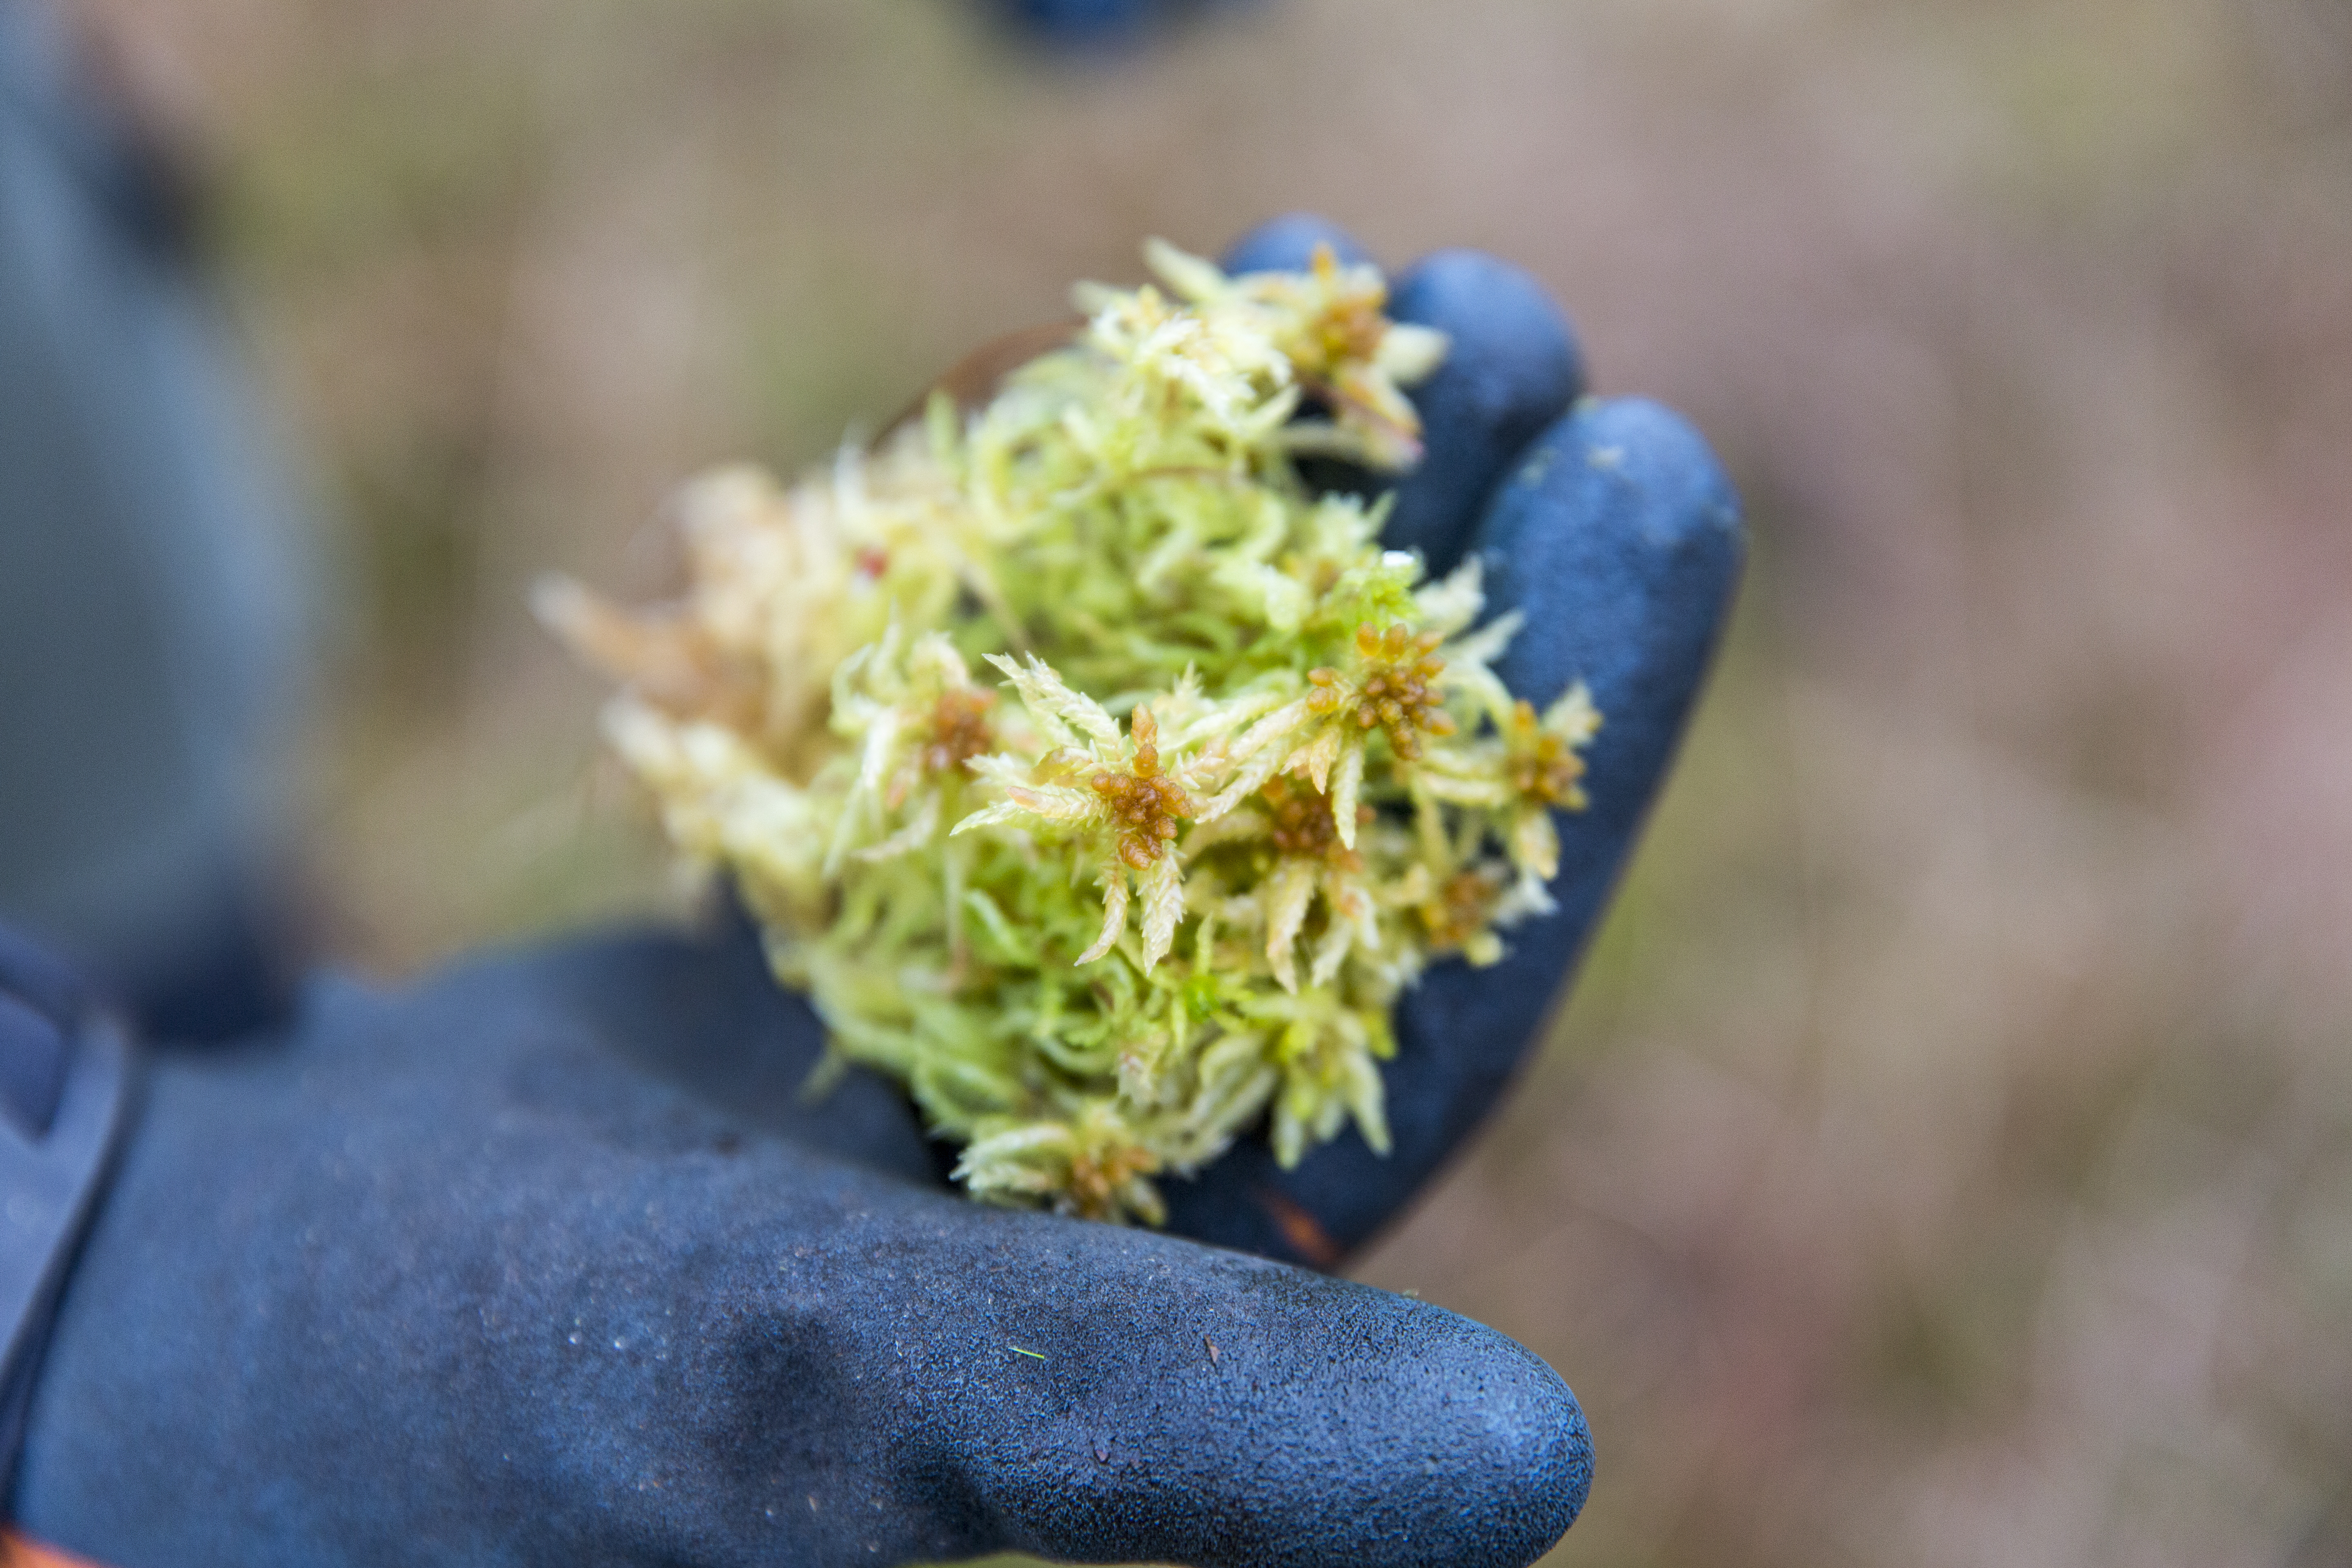 A sphagnum moss plug held in a gloved hand